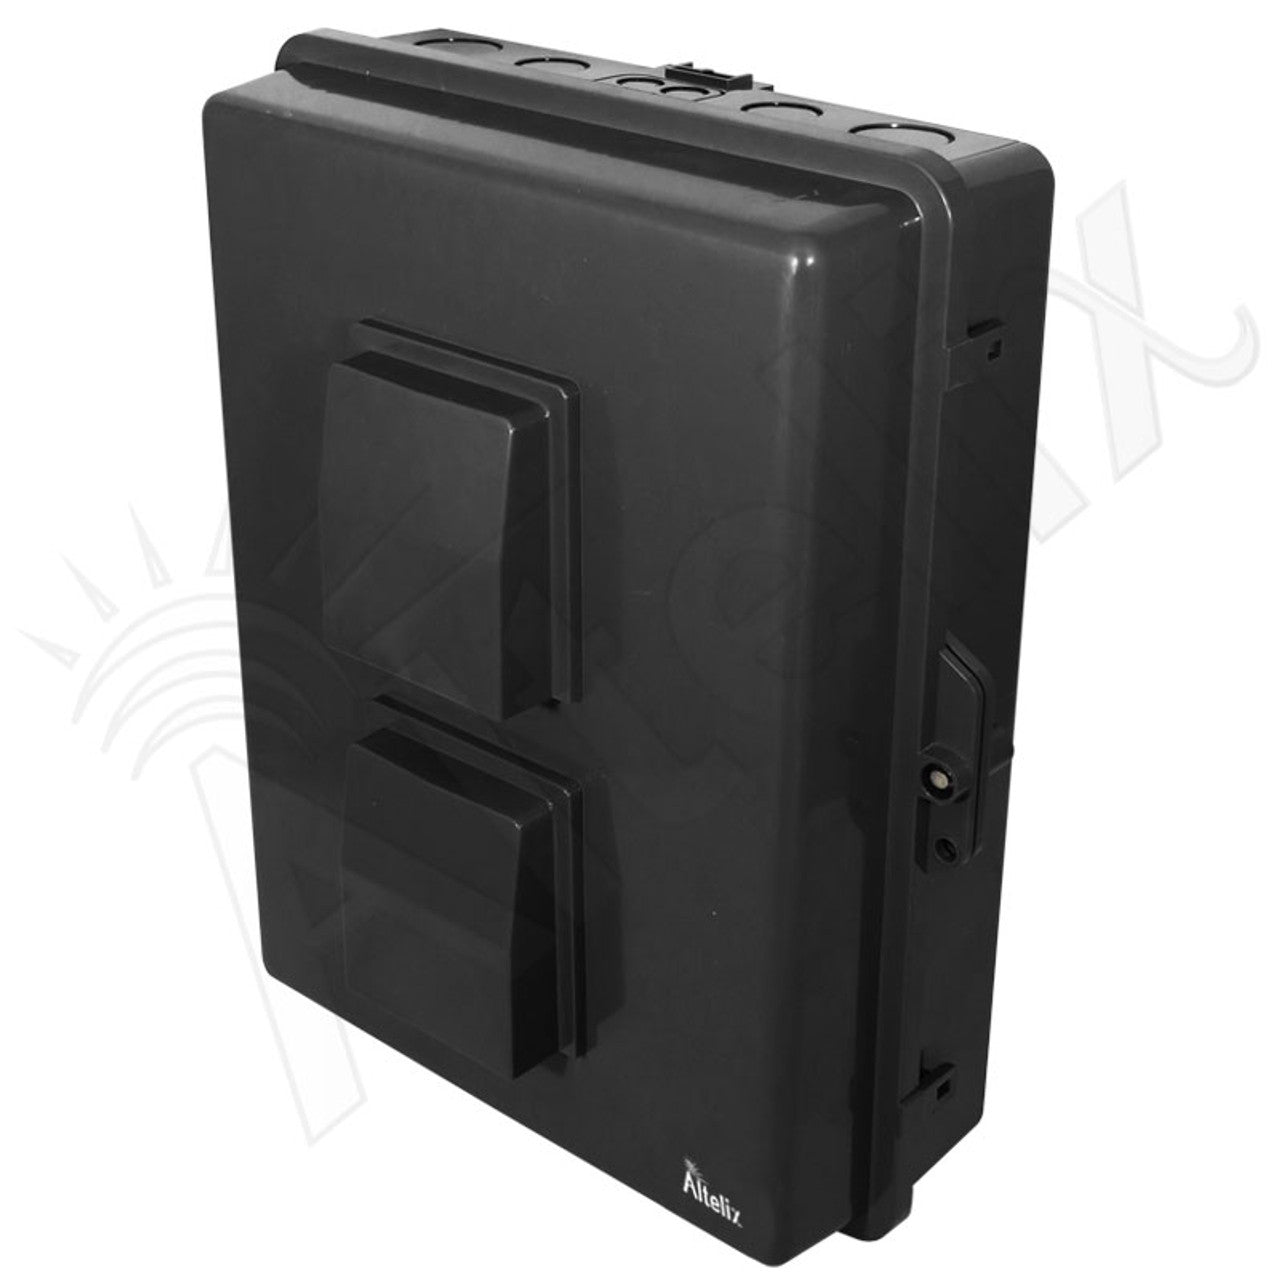 Buy black Altelix 17x14x6 Polycarbonate + ABS Vented Weatherproof NEMA Enclosure with Aluminum Mounting Plate, 120 VAC Outlets &amp; Power Cord